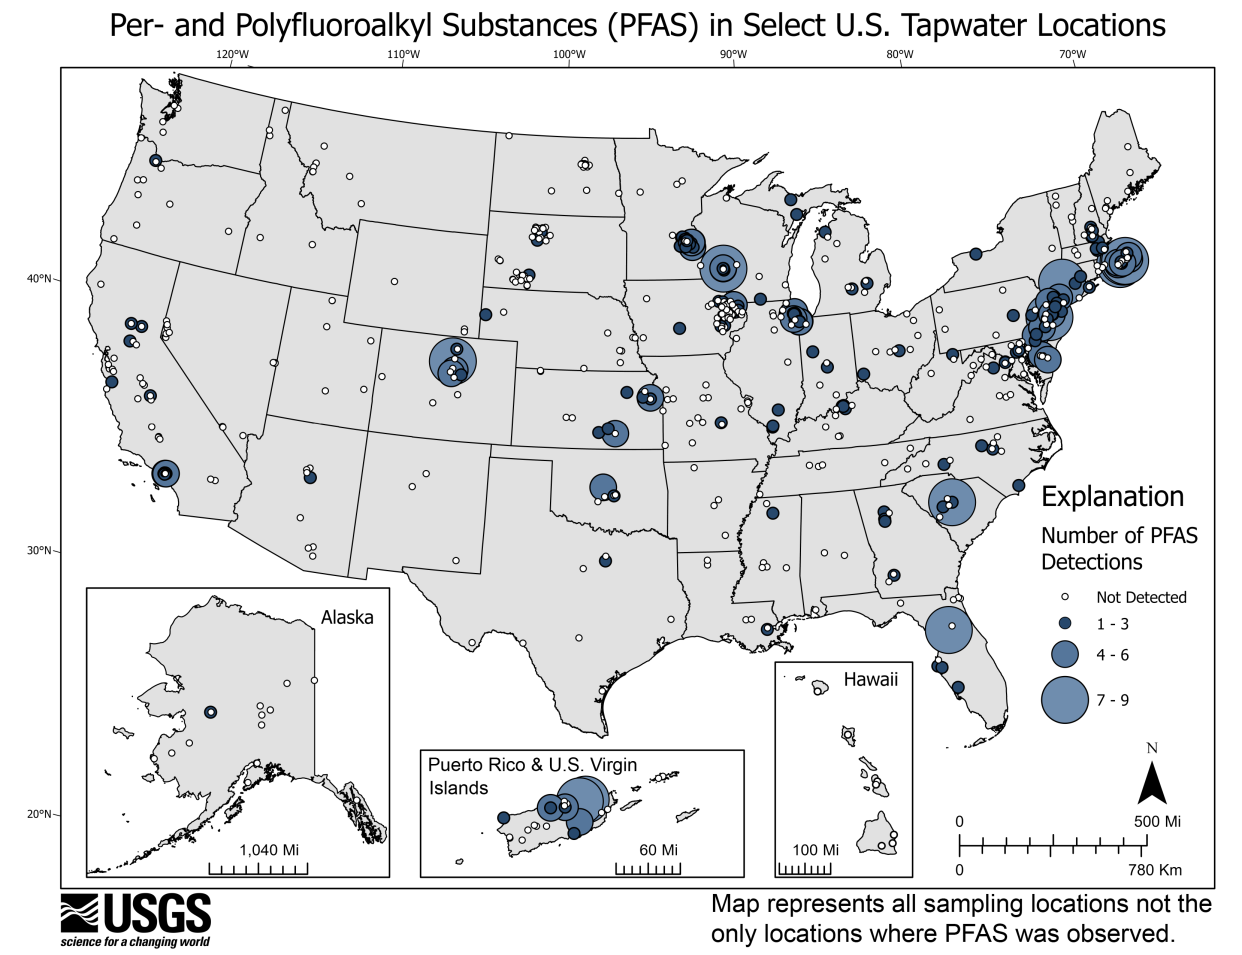 PFAS, also known as "forever chemicals," have been discovered in at least 45% of the nations drinking water supply, according to a report by the U.S. Geological Survey.